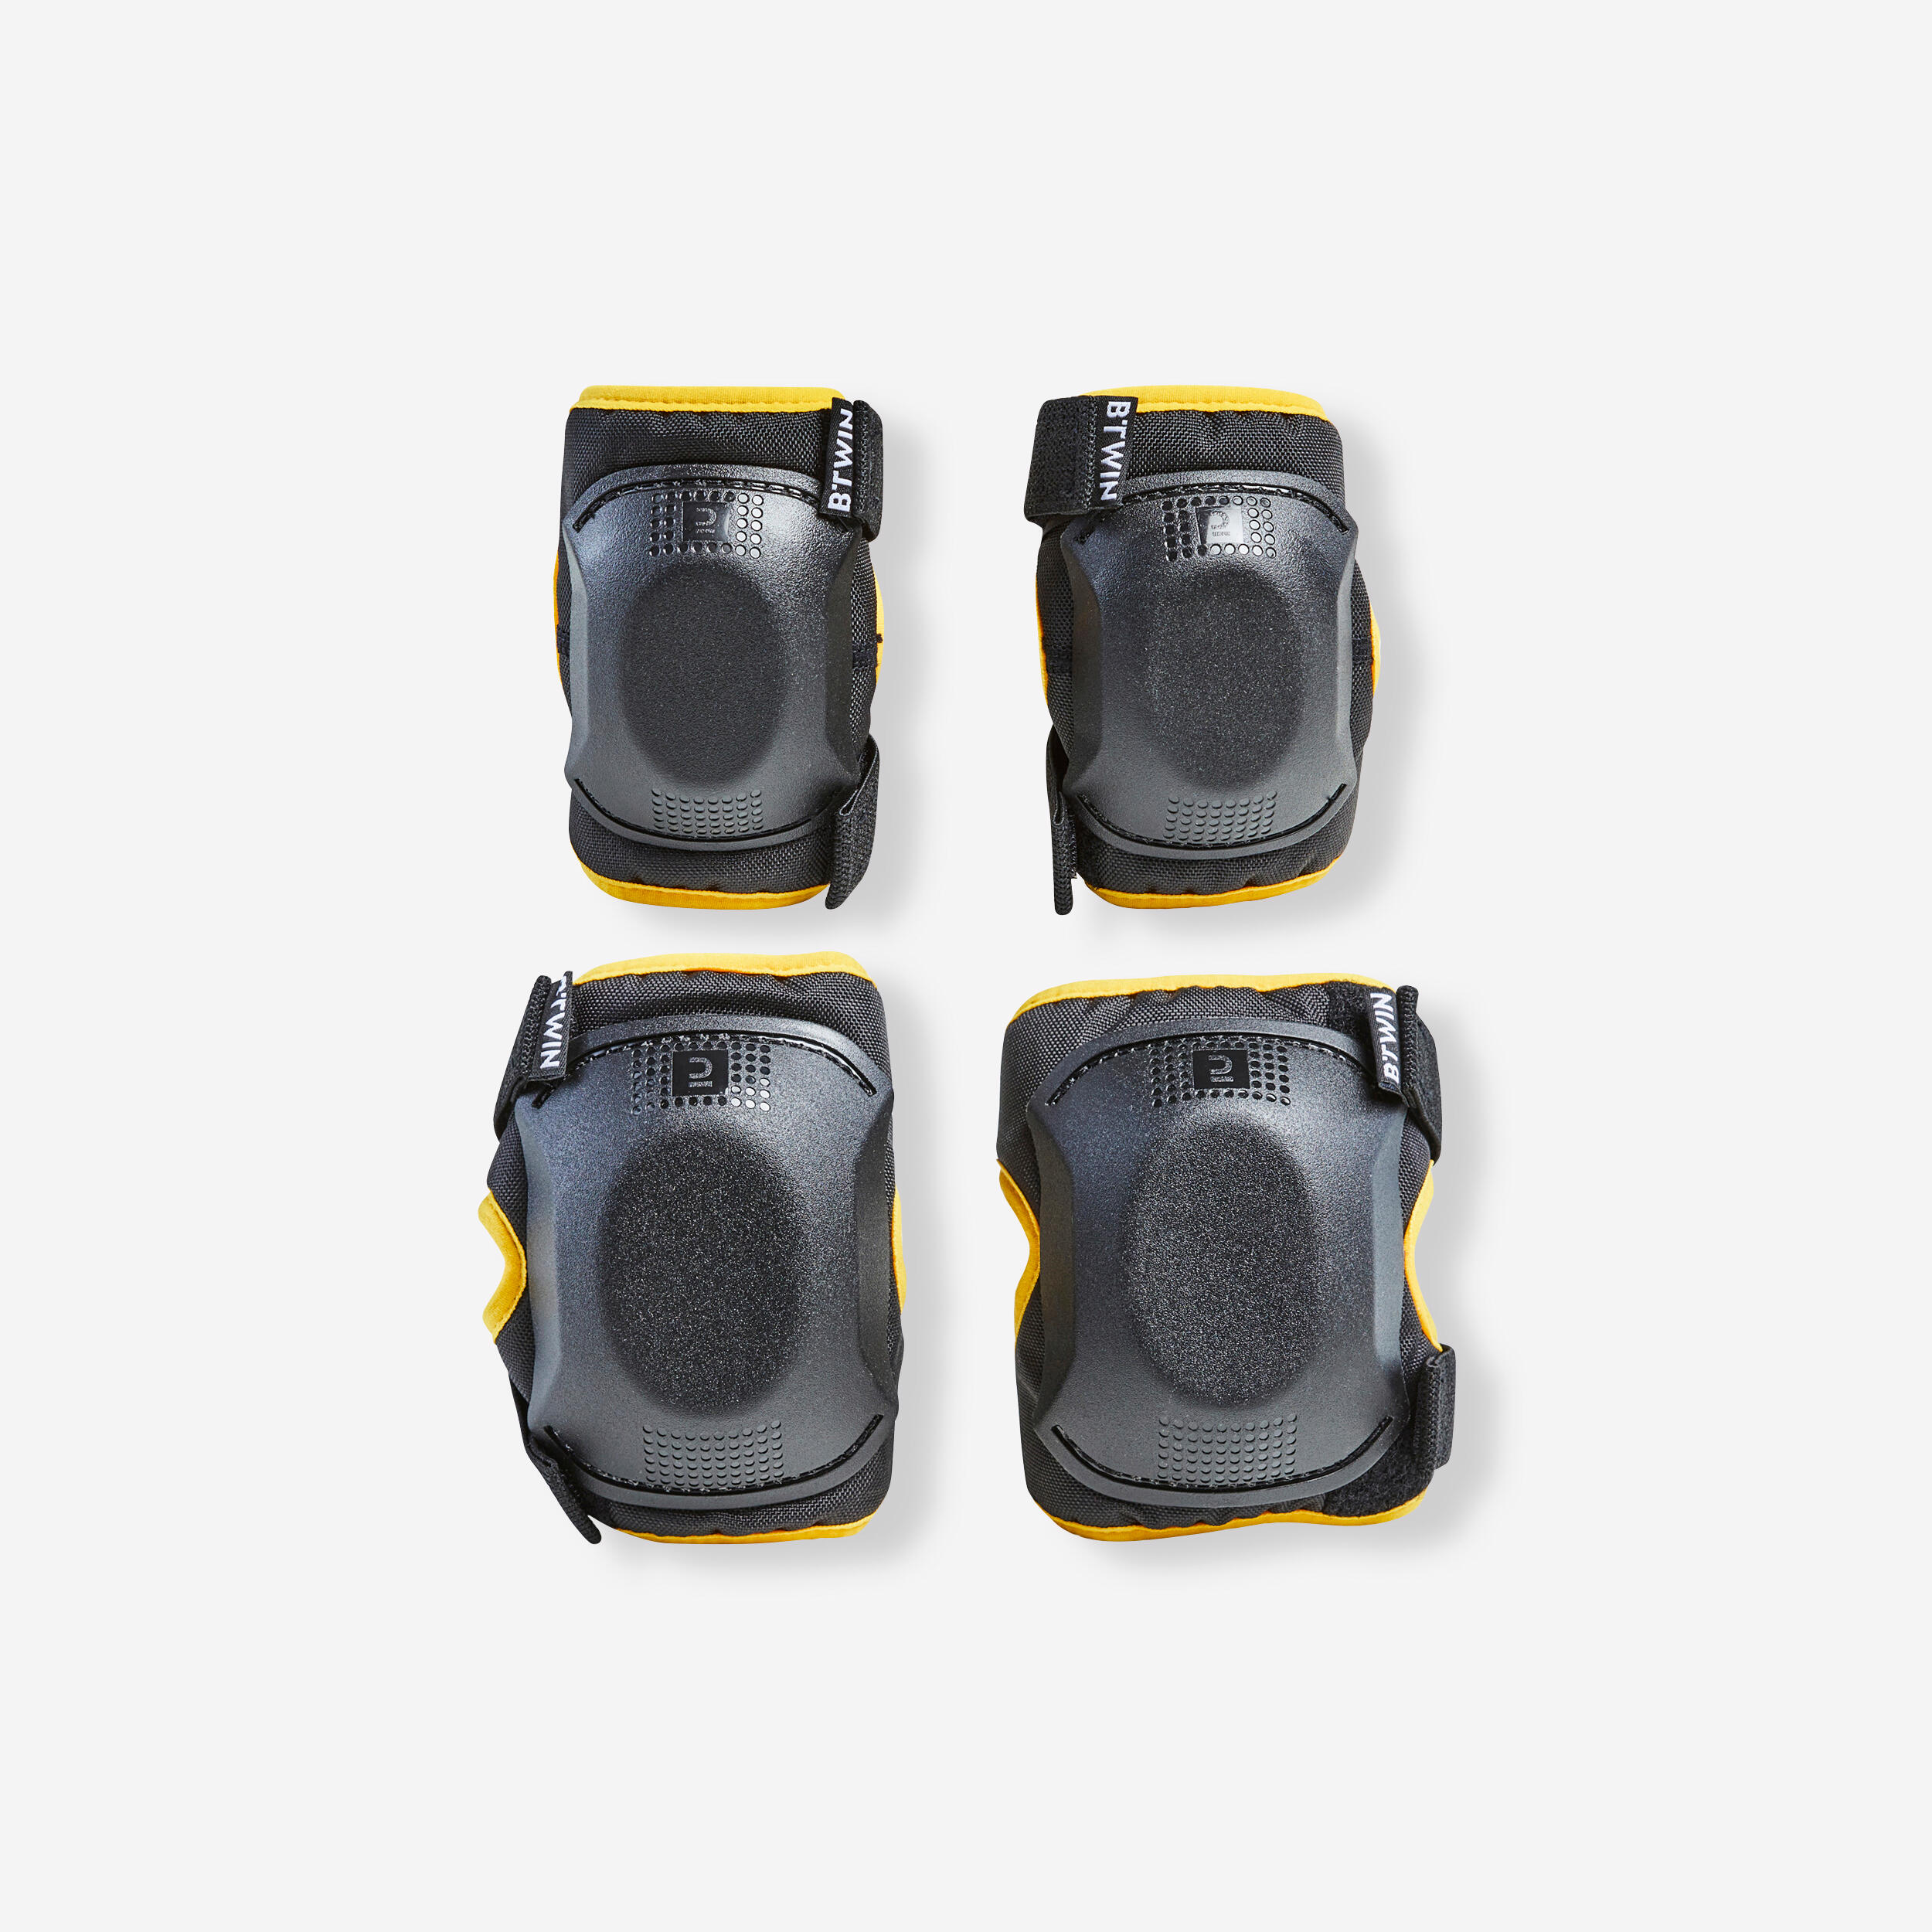 BTWIN One Size Cycling Elbow and Knee Protectors Set 3-6 Years - Yellow